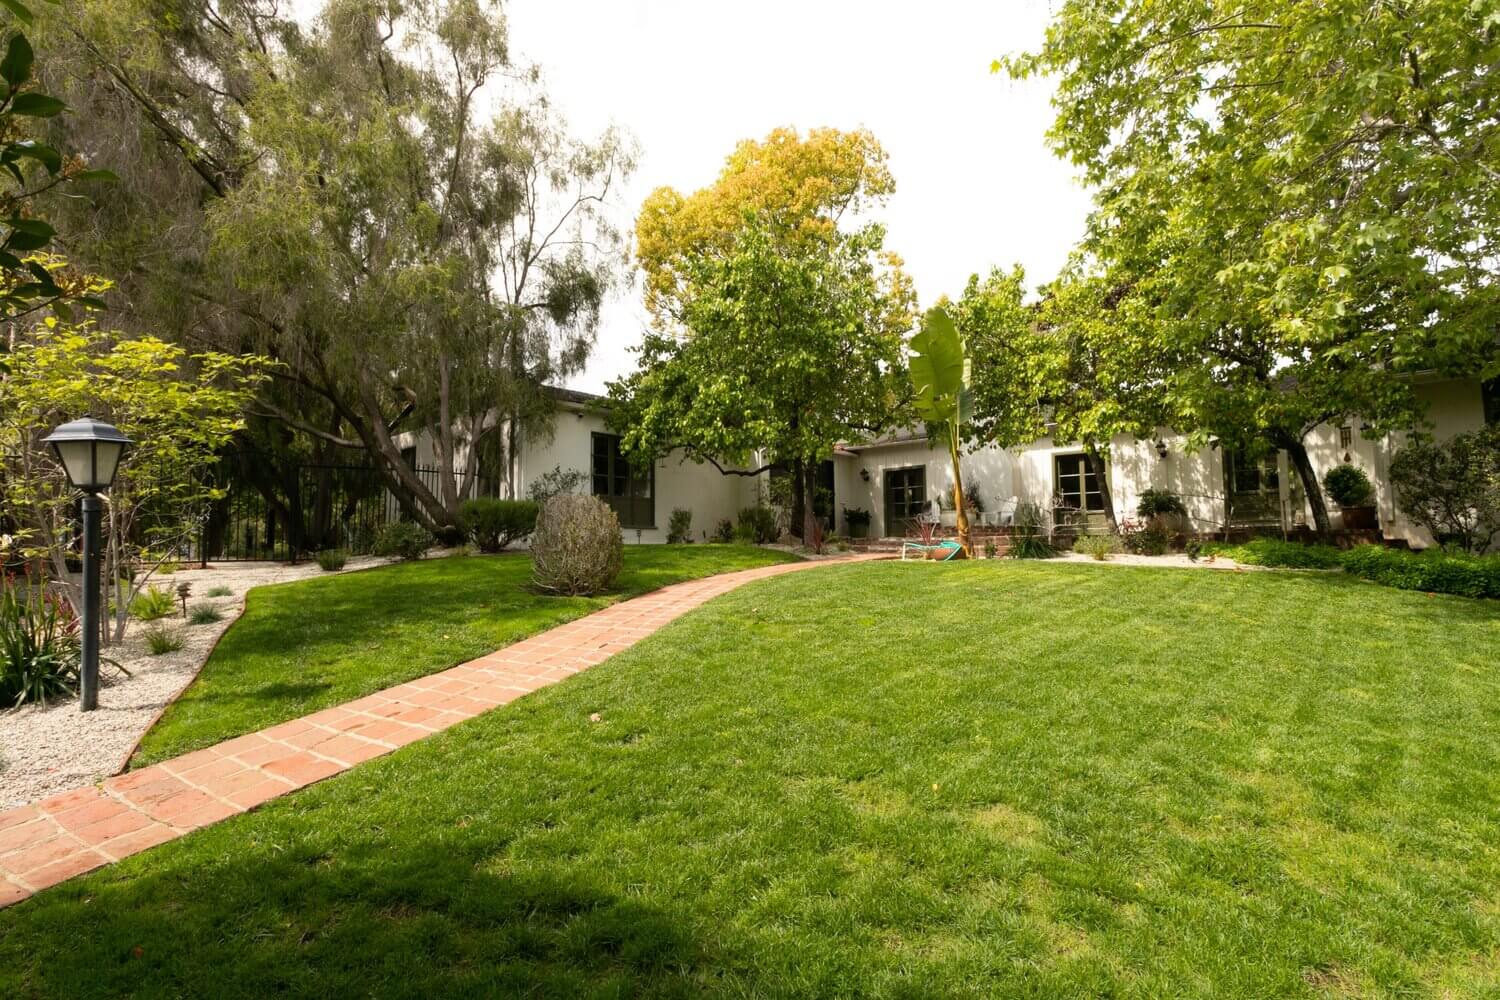 hollywood hills home matt helders zooey deschanel mark ruffalo nordroom40 A Lovely Hollywood Hills Home with a Celebrity History